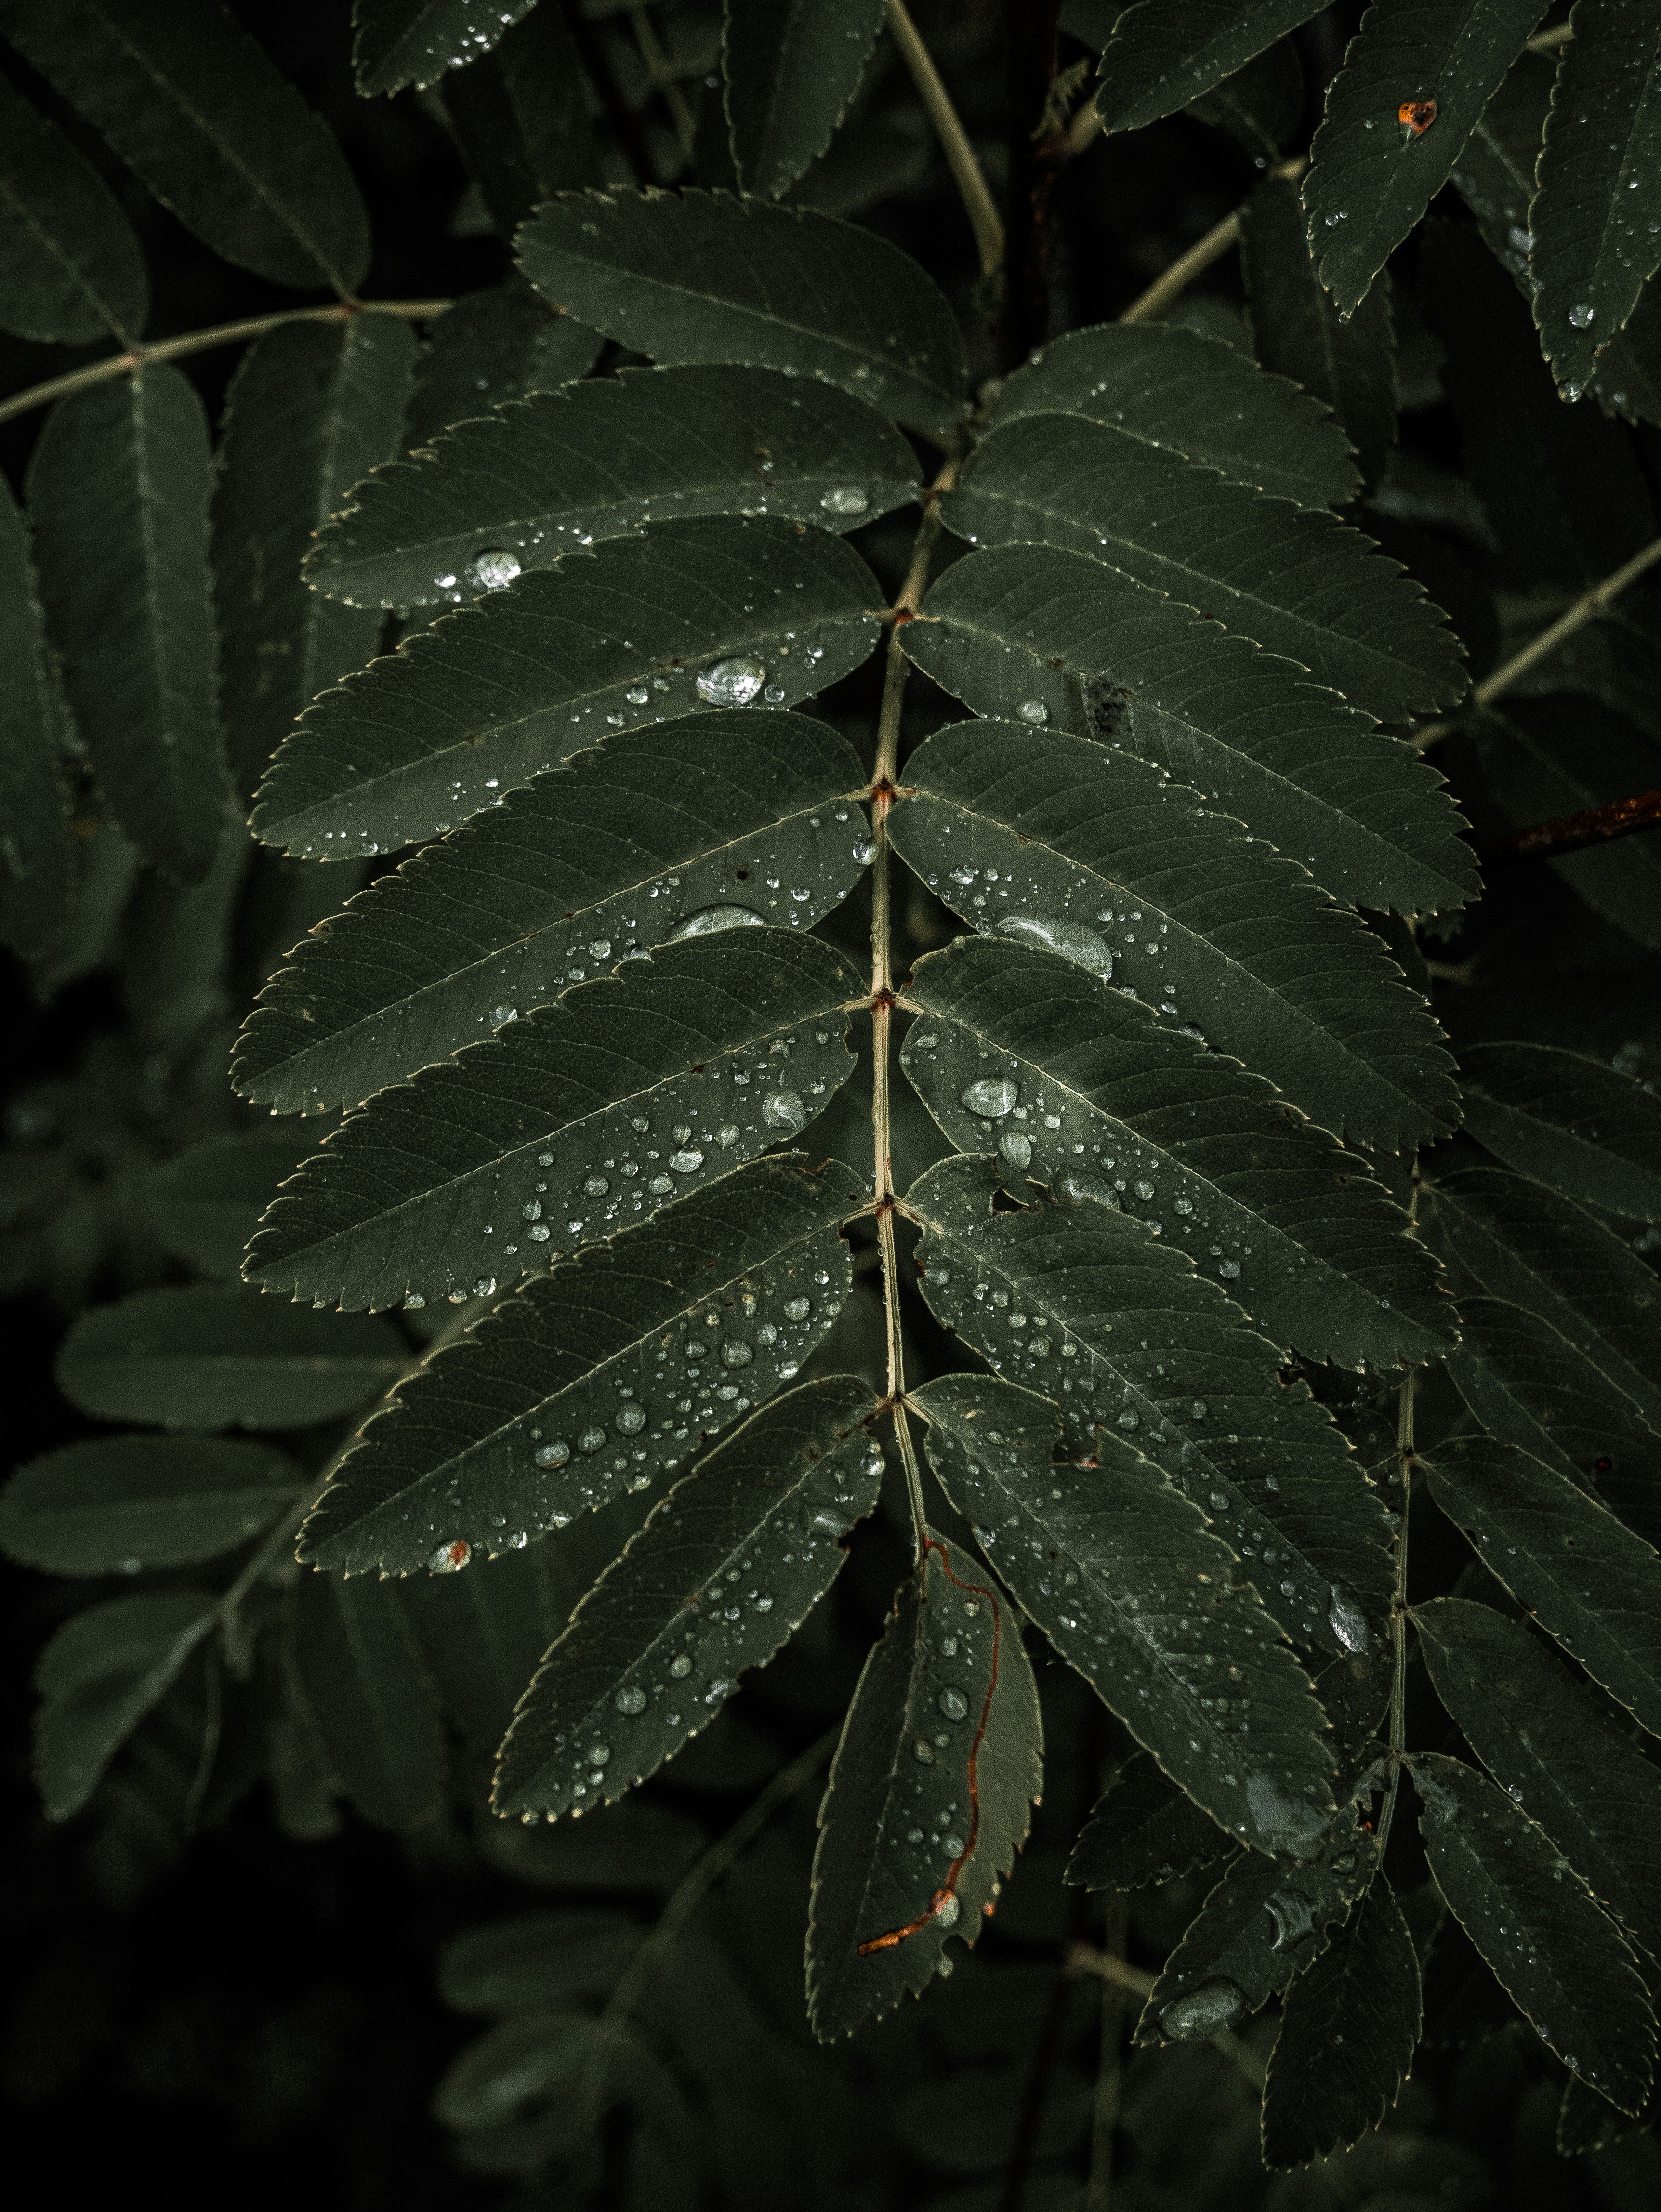 green and brown leaves with water droplets